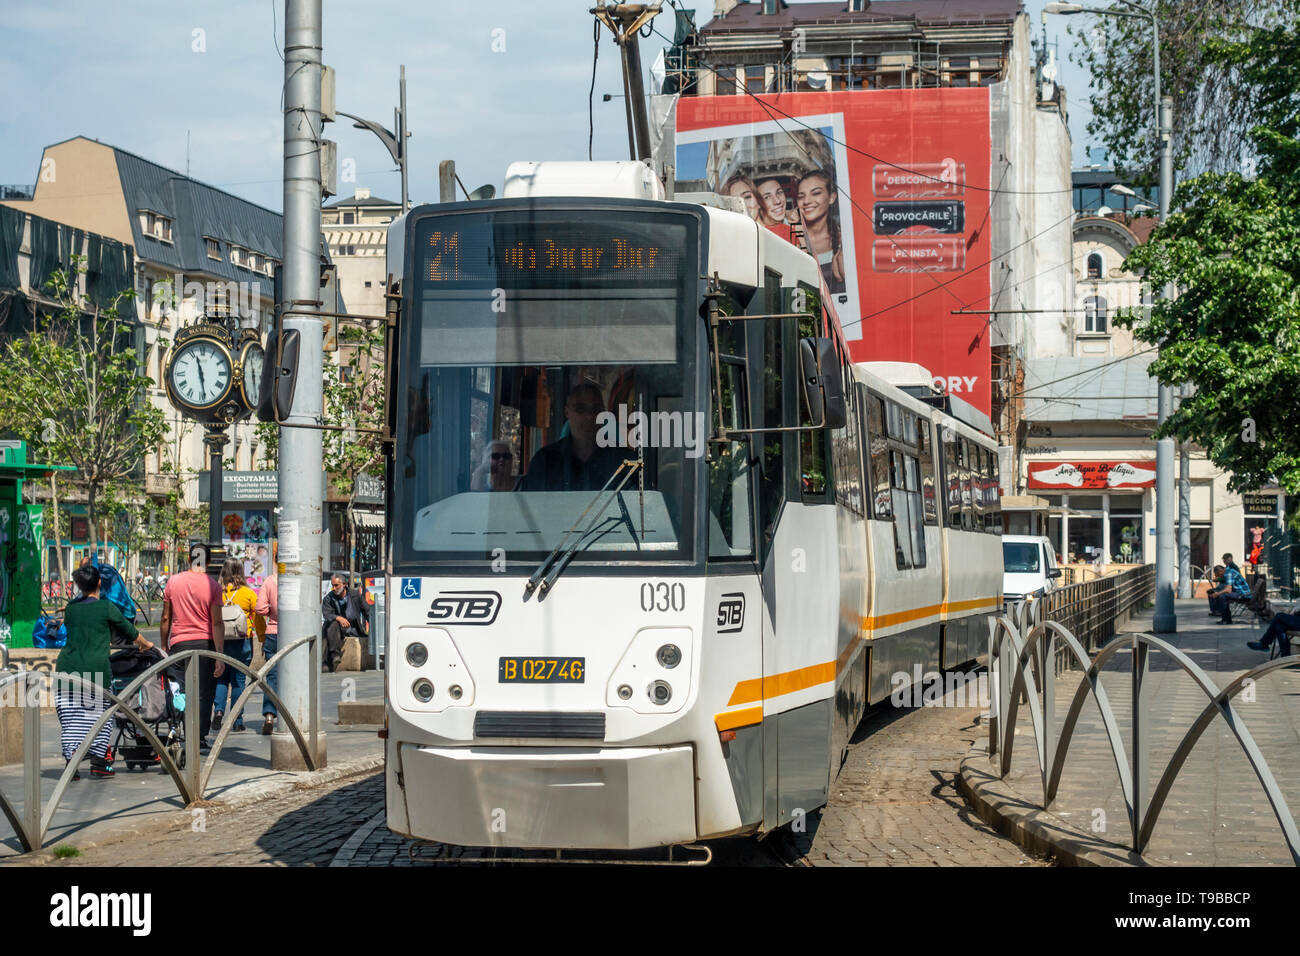 A three-section tram, route 21, in Piata Sf Georghe (St George Square) in the Old Town area of central Bucharest, Romania. People walking and relaxing Stock Photo